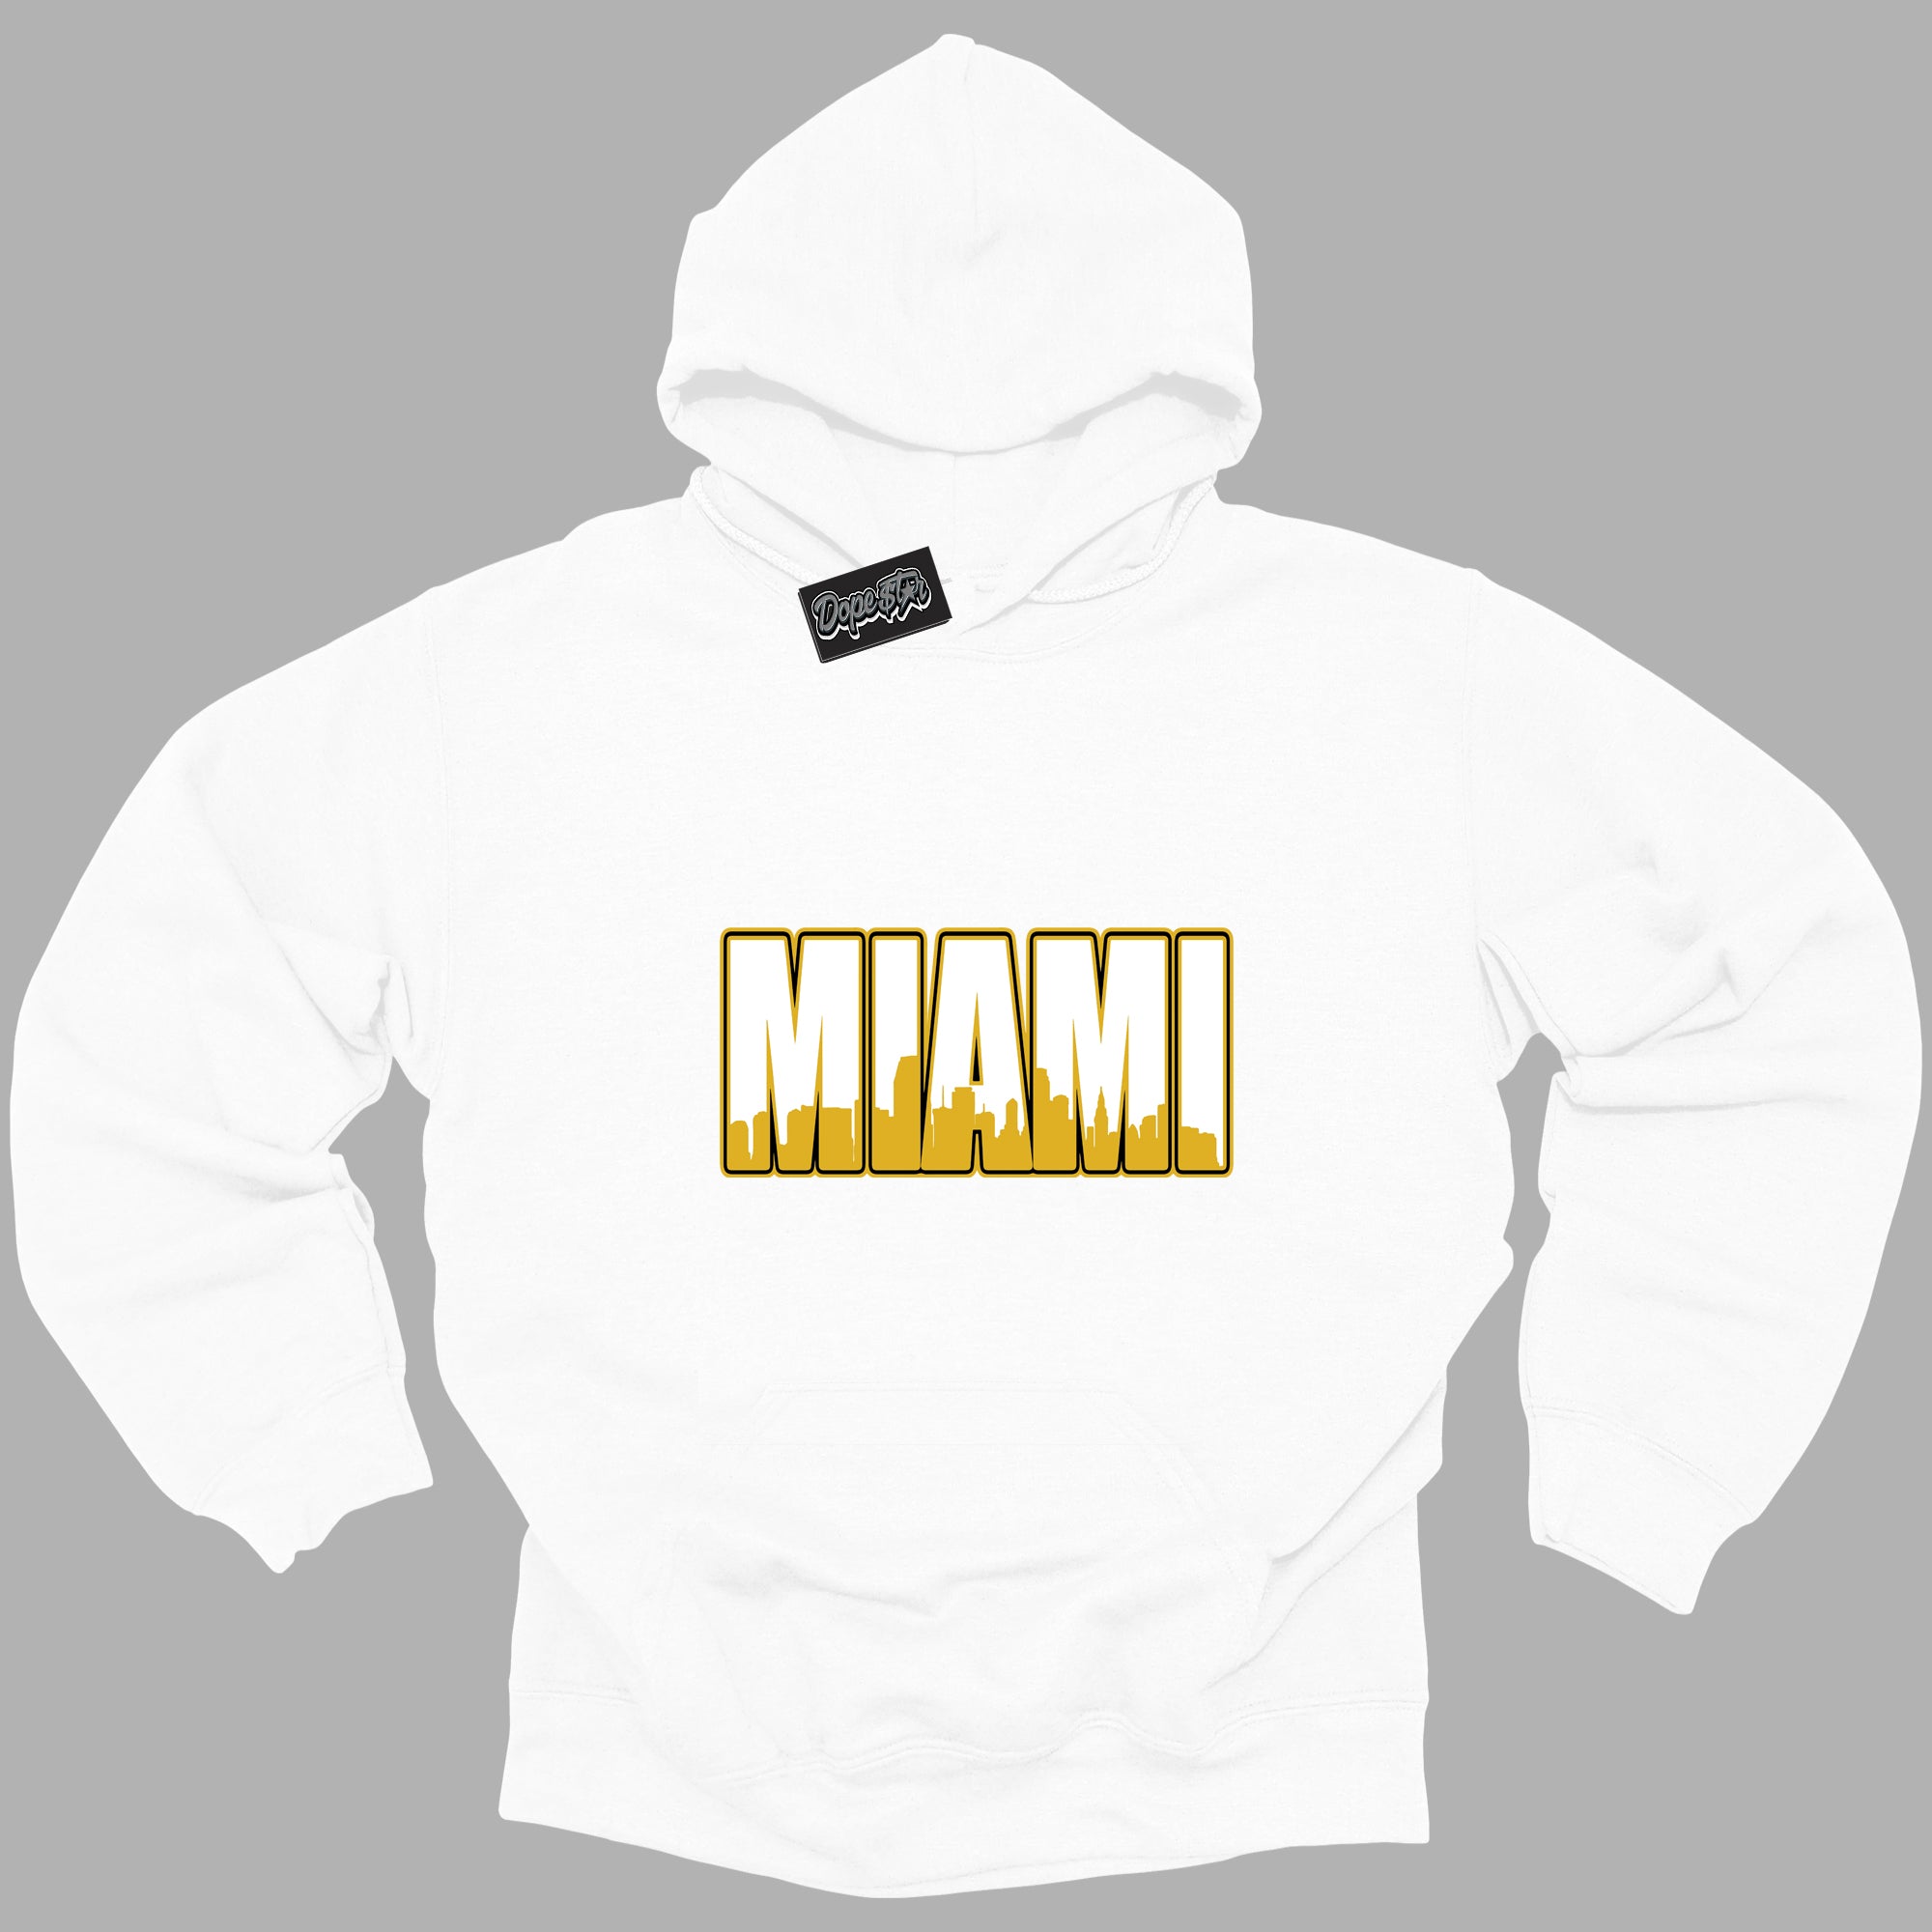 Cool White Hoodie with “ Miami ”  design that Perfectly Matches Yellow Ochre 6s Sneakers.